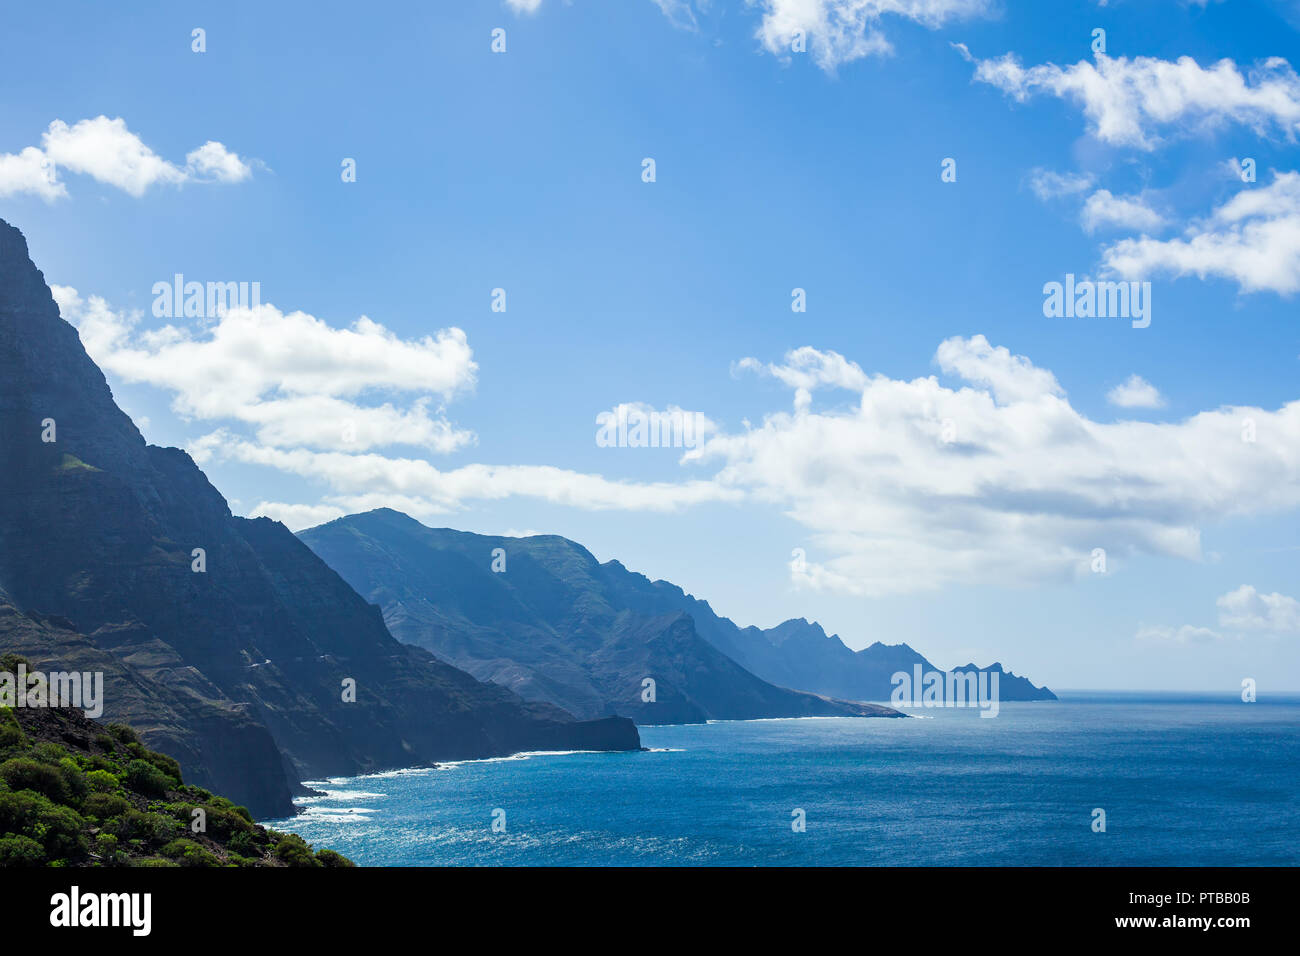 Scenic landscape of mountains and atlantic ocean on Gran Canaria island. Nature background Stock Photo